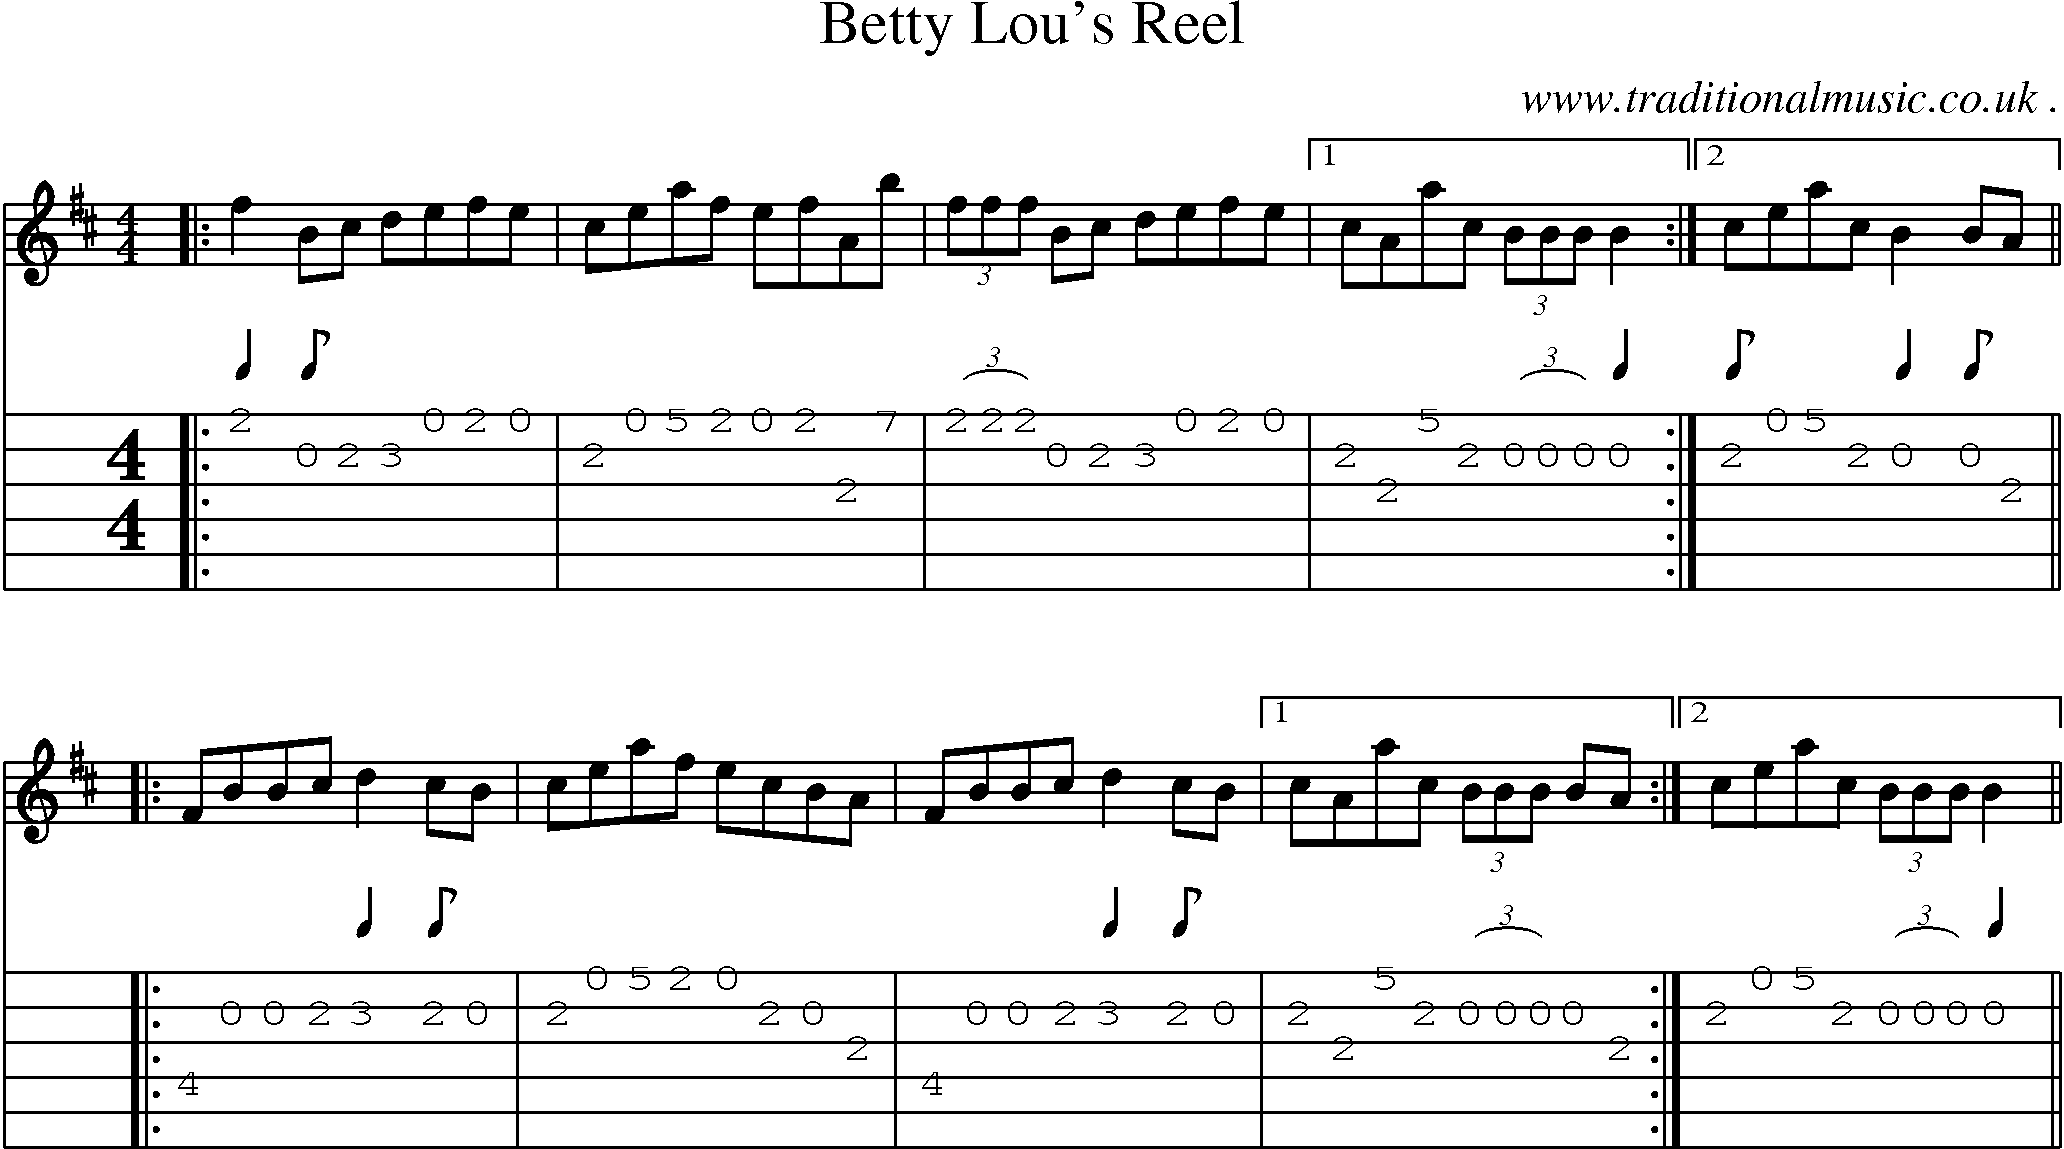 Music Score and Guitar Tabs for Betty Lous Reel